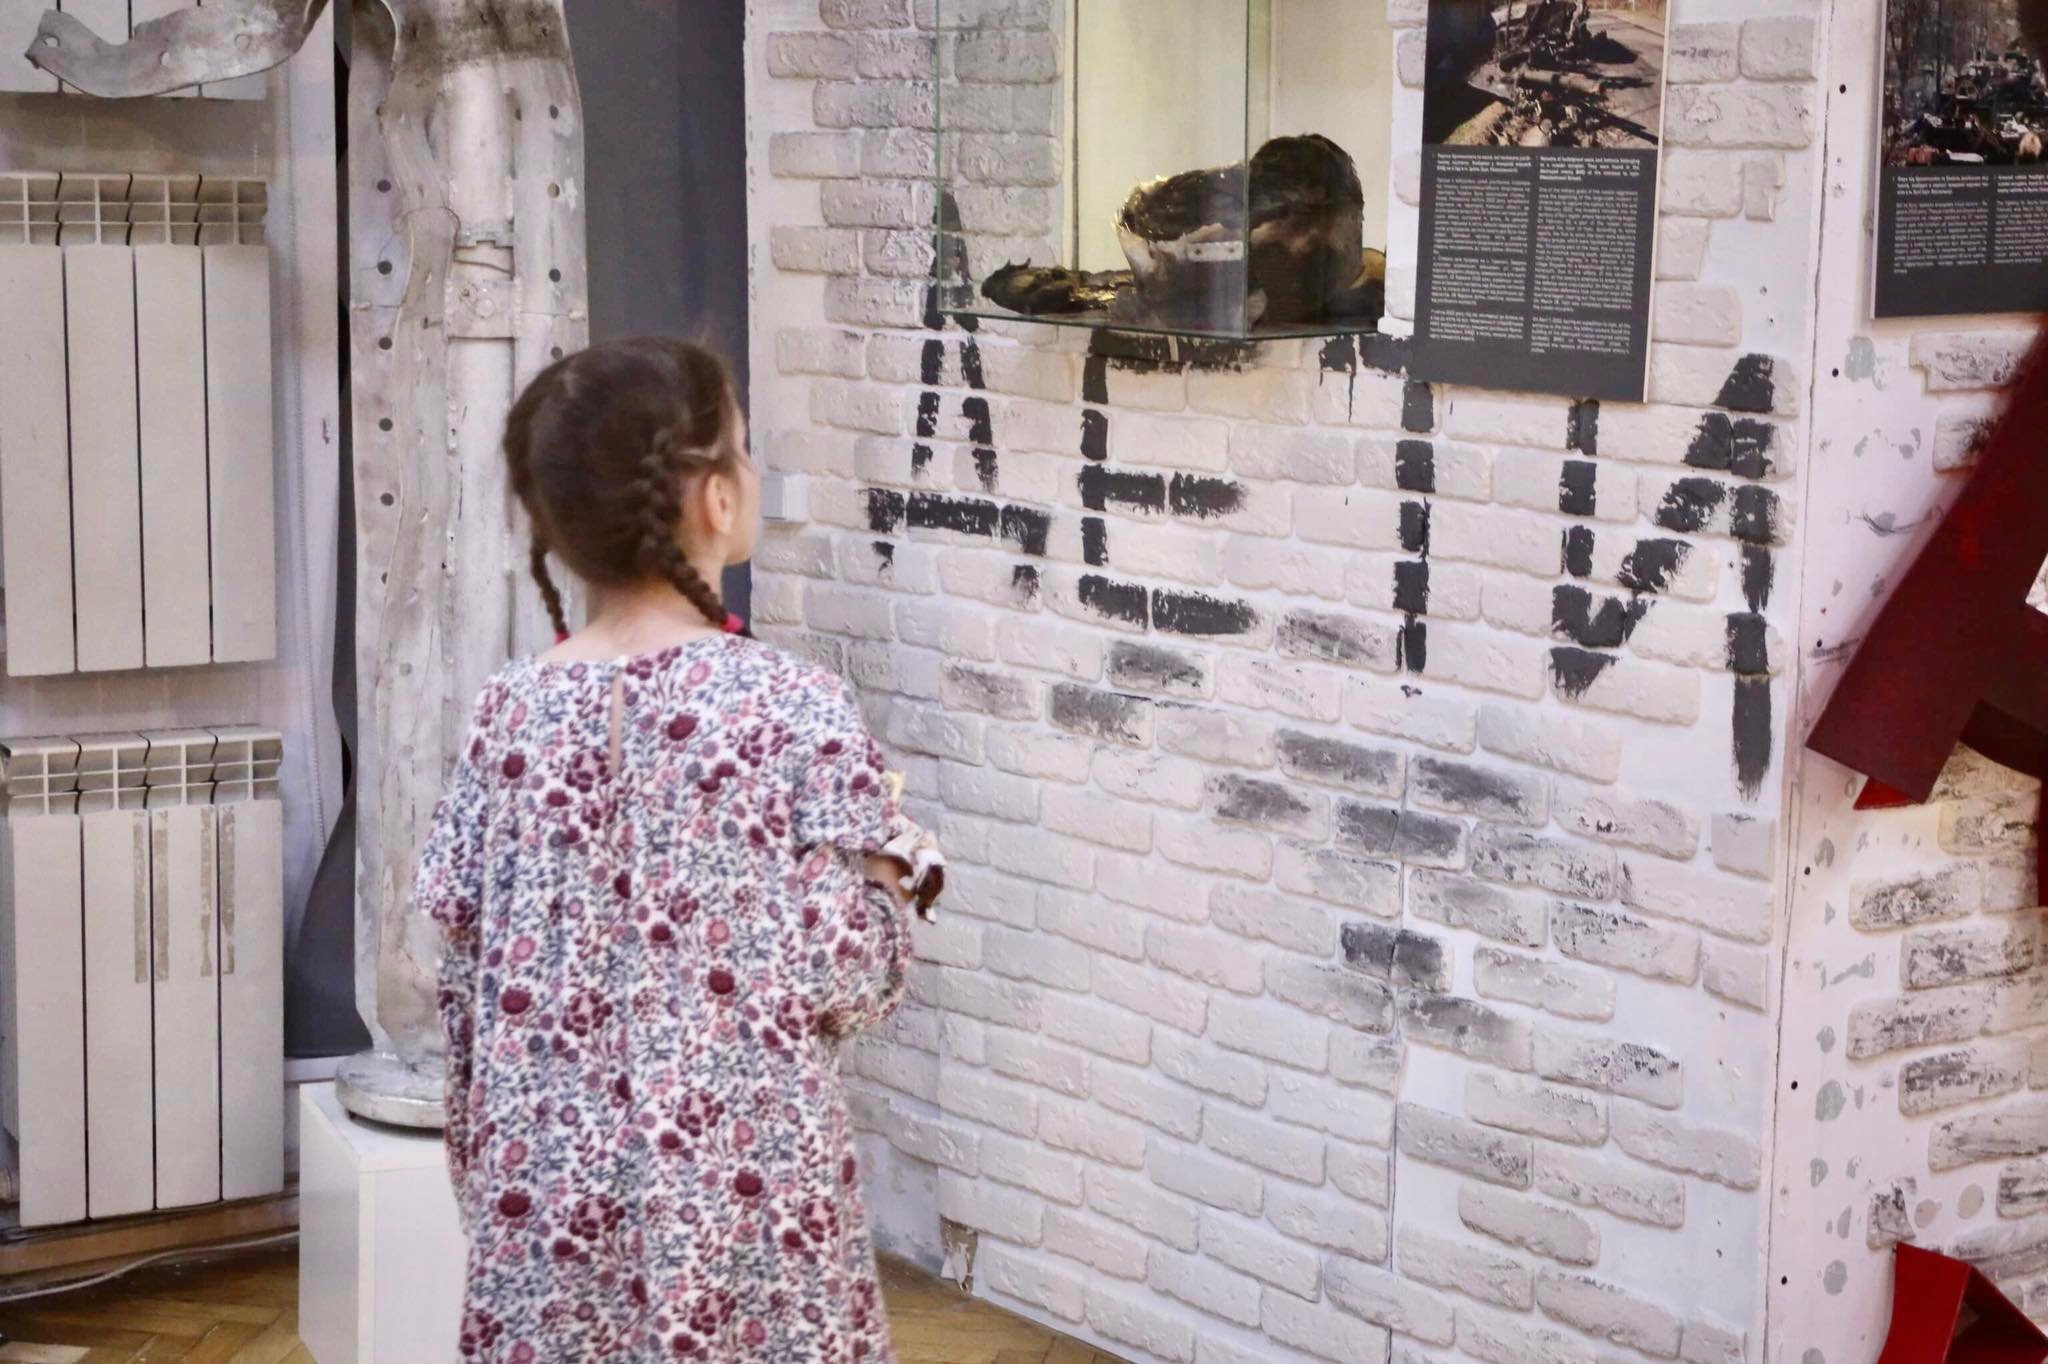 A little girl visits the exhibition “Invasion. Kyiv shot,” dedicated to the 2022 defense of Kyiv from the Russian invaders. The inscription on the wall – “Children” – was often written by the locals in places under Russian attack in a hope that a place is not hit. Photo by Euromaidan Press ~